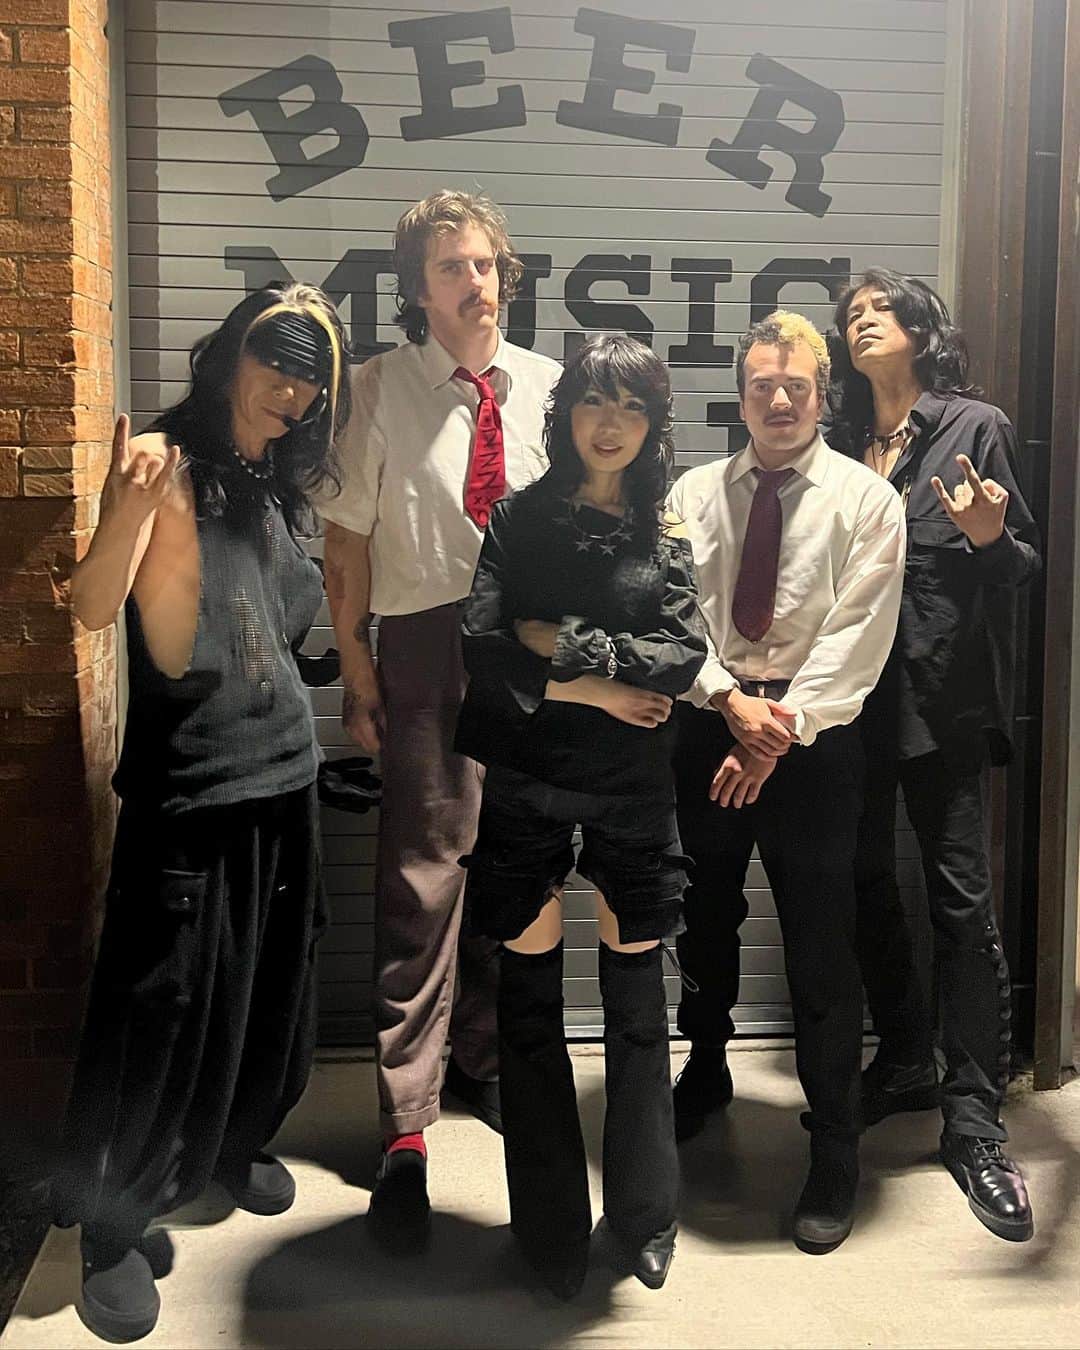 BORISのインスタグラム：「“Twins of Evil” US tour 2 shows left with them!  Mr.Phlyzzz is Siiiiiiick! They doing Great live performance and stage presentation!  Please come and experience it.   Amphetamine Reptile Records のバンドMr.Phlyzzz! 毎晩素晴らしいLiveを見せてくれました、彼らとは残り2本！とても寂しい…」